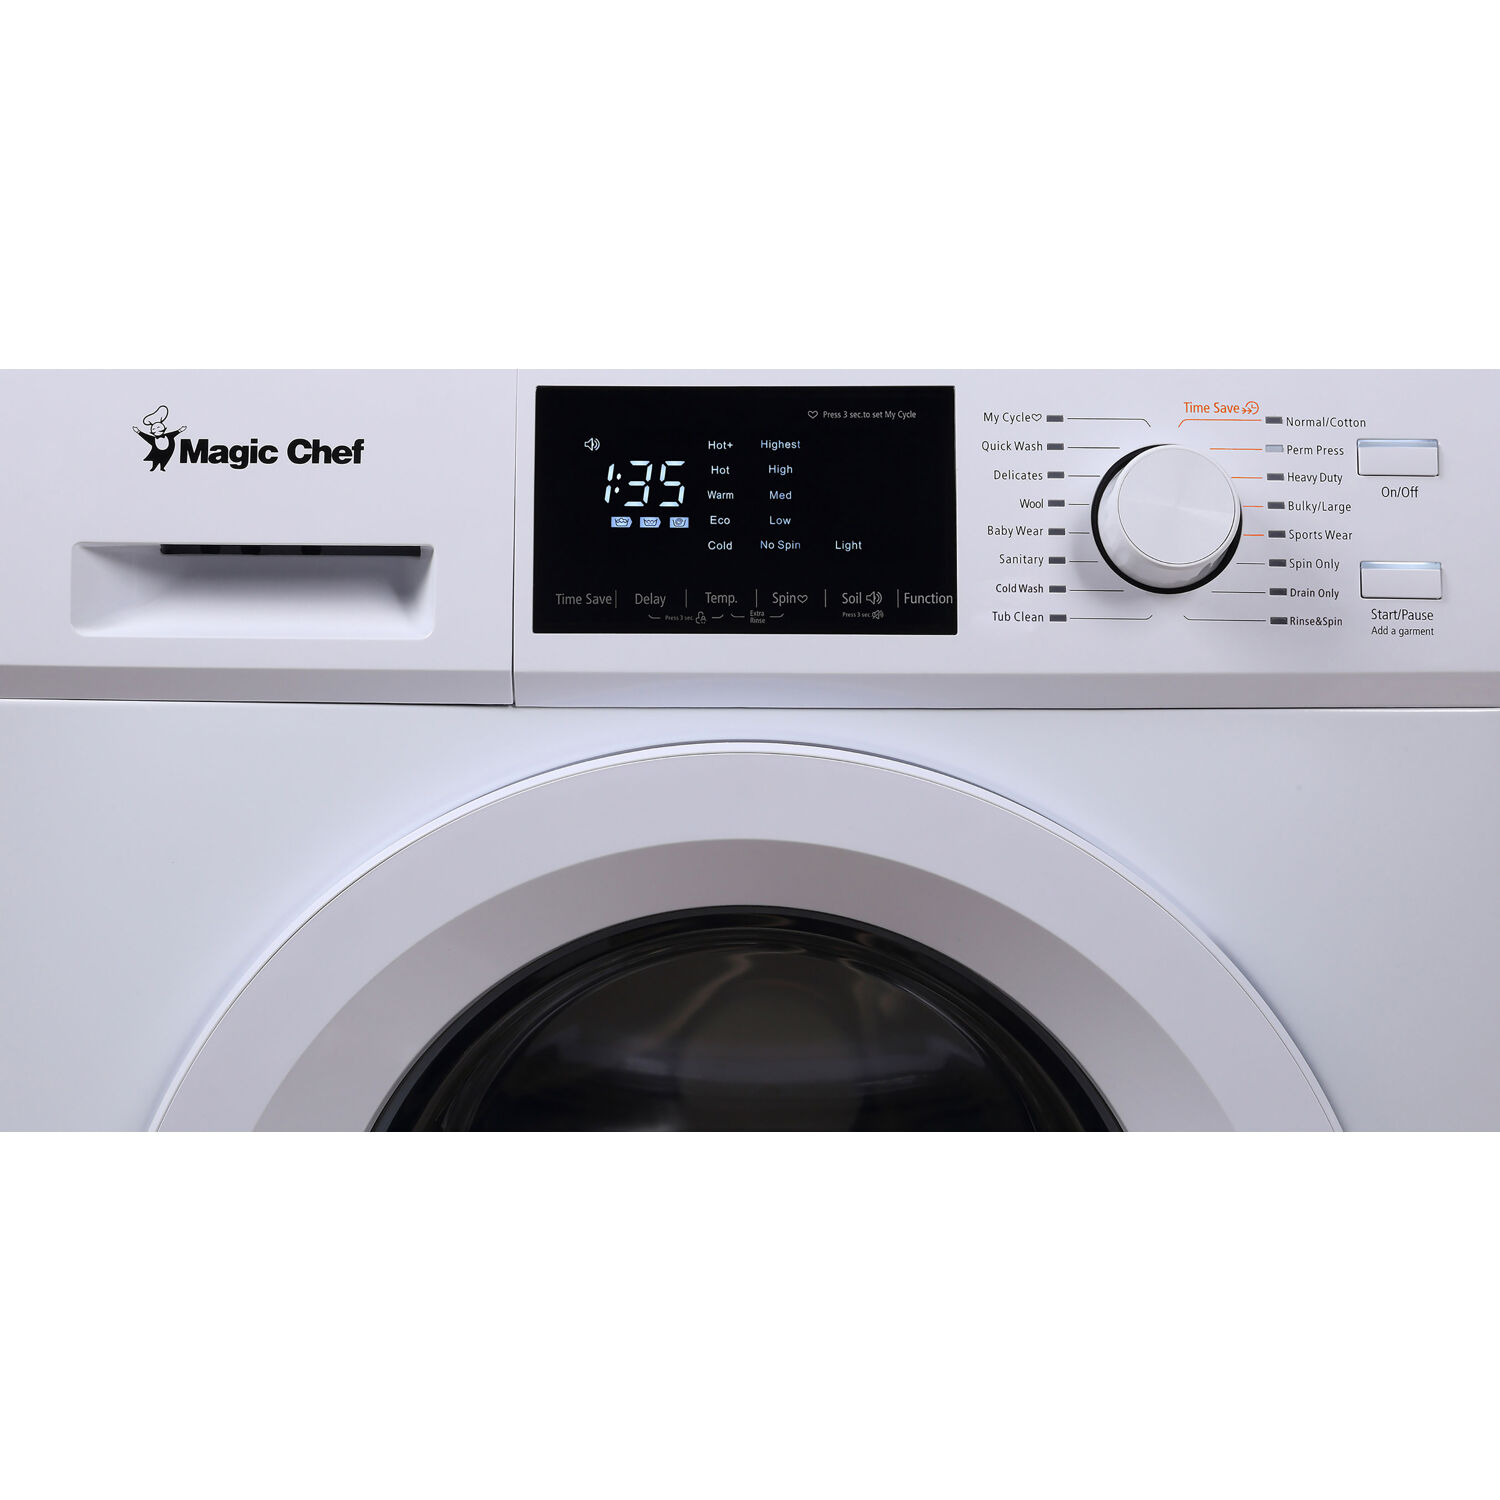 Magic Chef Brand 24 in. 2.7 Cu. ft. Front Load Washer in White MCSFLW27W, 23.4 in L x 33.5 in H x 23.4 in D, 160.9 lbs. - image 2 of 8